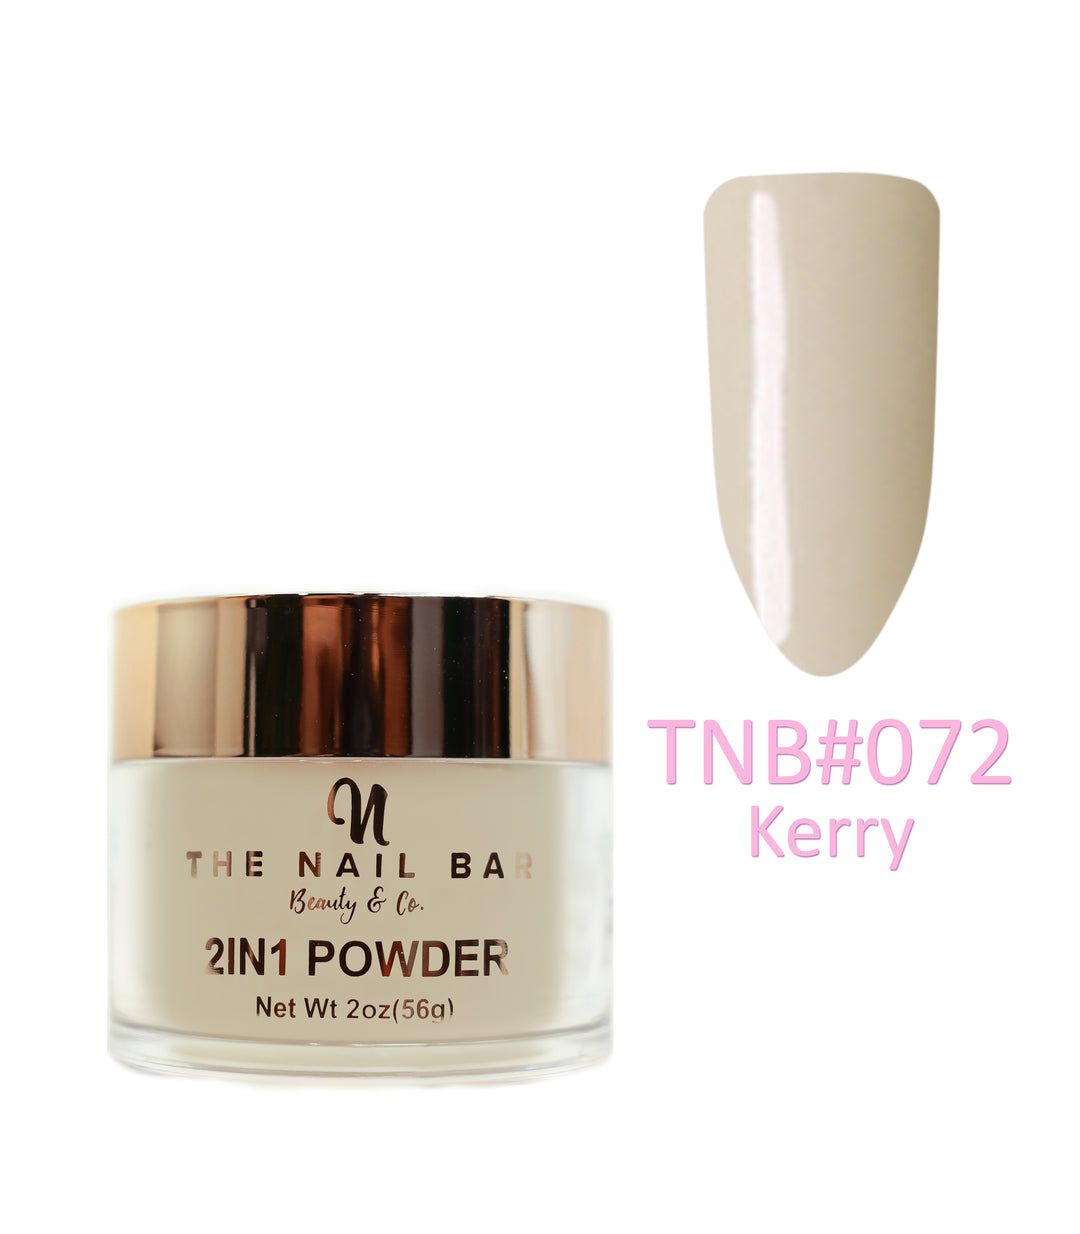 2-In-1 Dipping/Acrylic colour powder (2oz) -Kerry - The Nail Bar Beauty & Co.